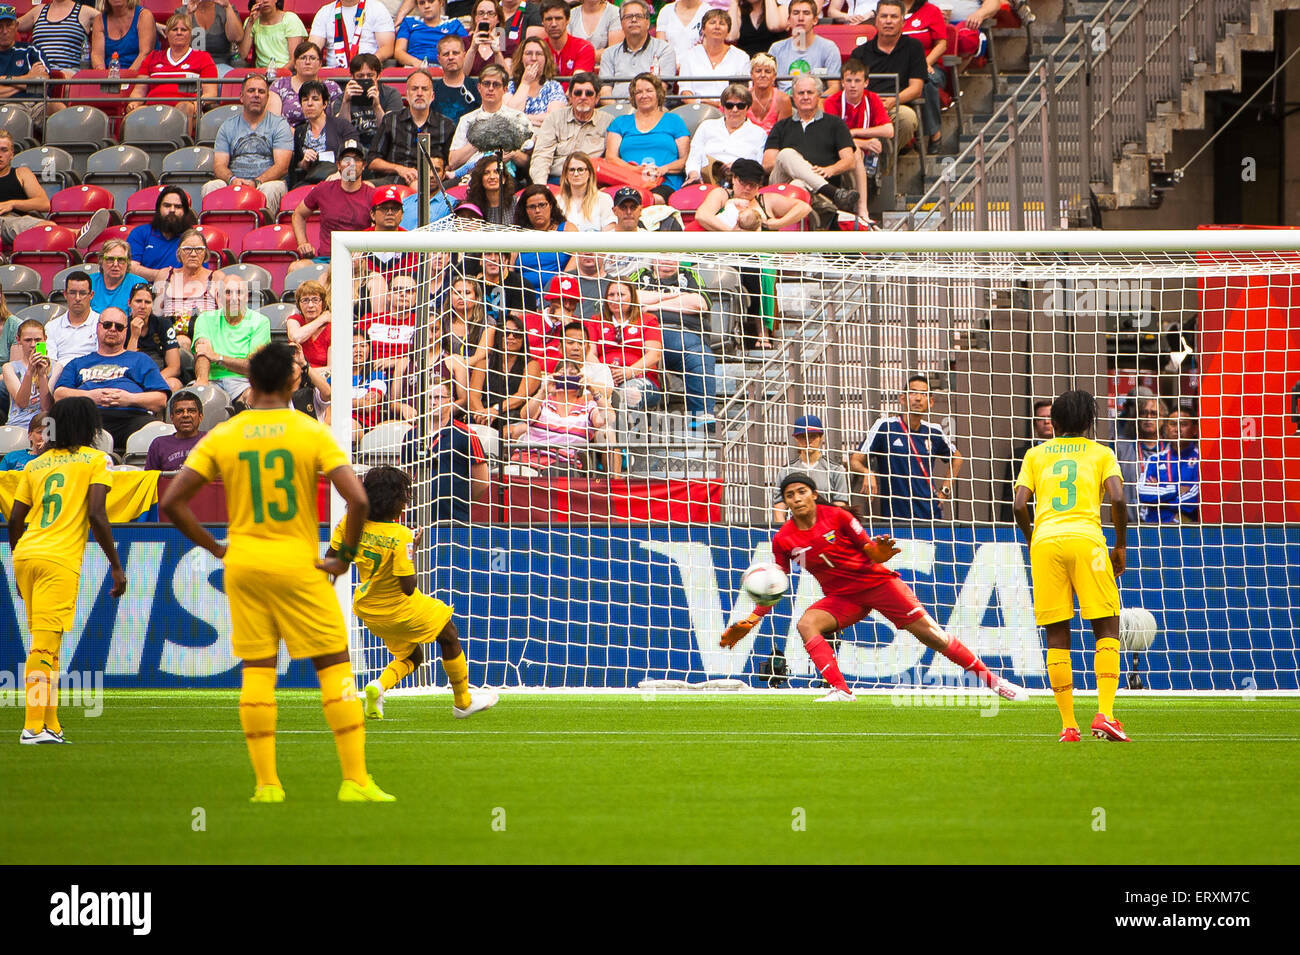 Vancouver, Canada. 8th June, 2015. Ecuador goalkeeper Shirley BERRUZ (#1) dives to protect the goal during the opening round match between Cameroon and Ecuador of the FIFA Women's World Cup Canada 2015 at BC Place Stadium. Cameroon won the match 6-0. Credit:  Matt Jacques/Alamy Live News Stock Photo